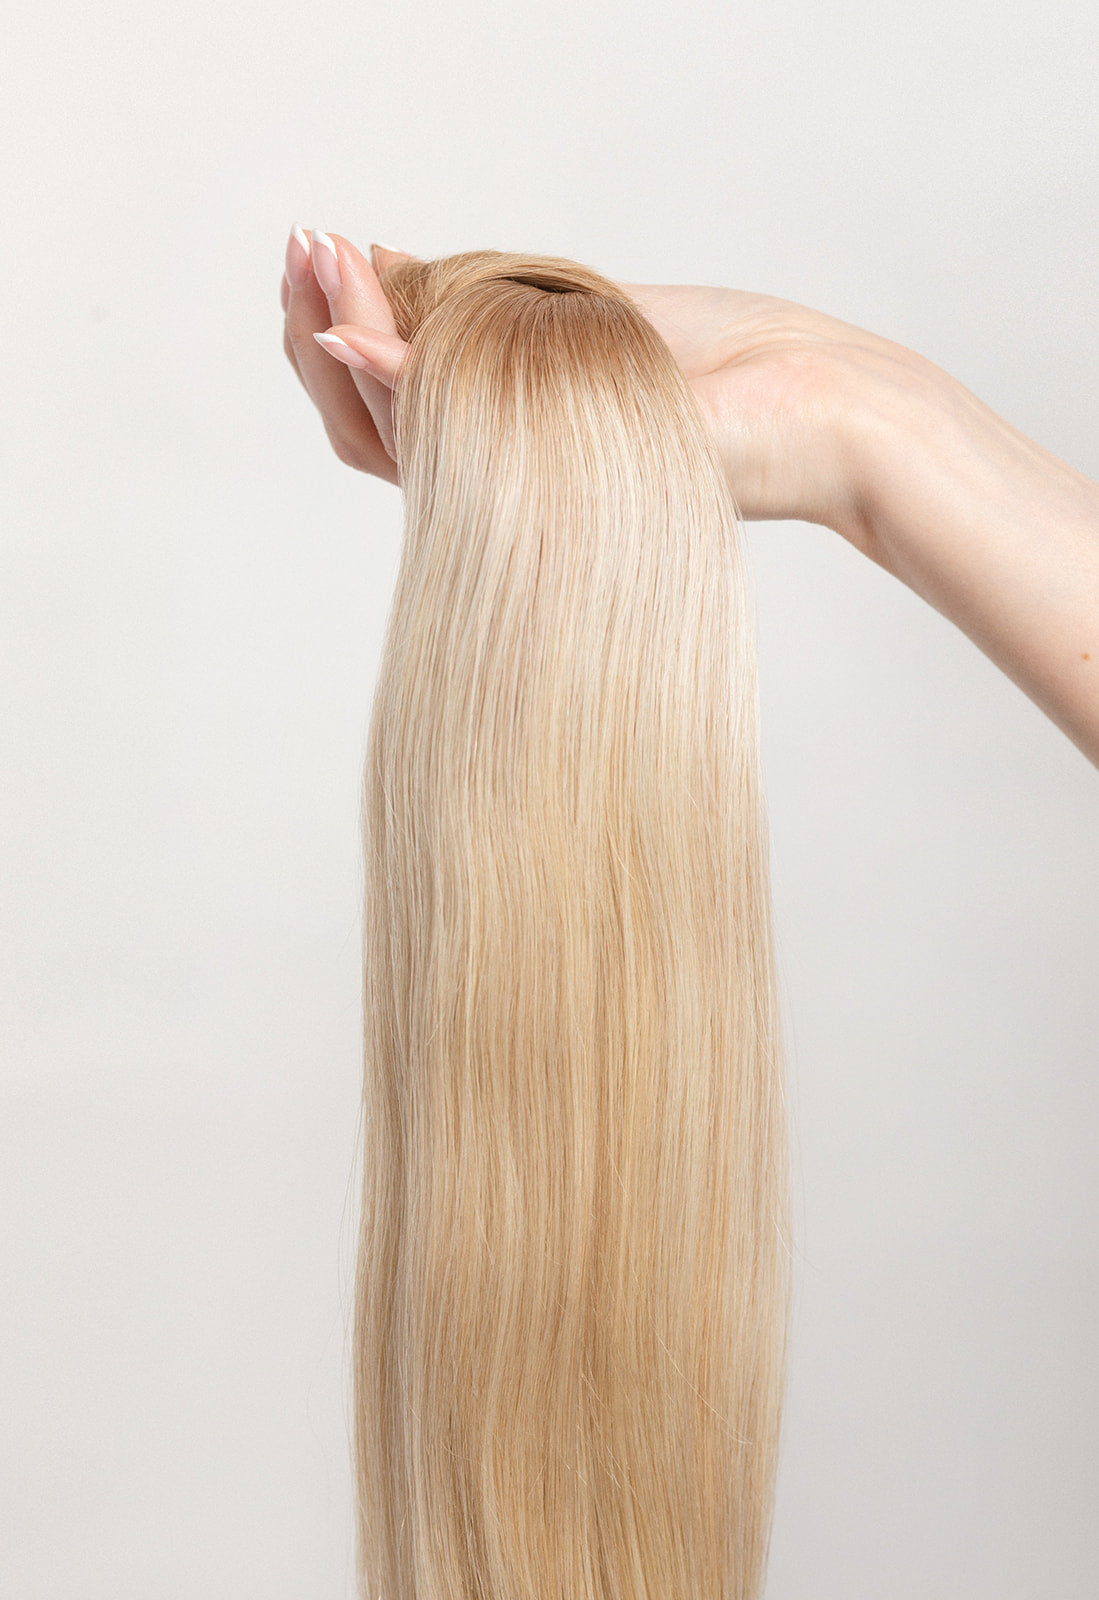 Soleil Sand is our golden blonde blend cascading from a Sand root.  Stylist lingo: Natural rooted level 8 blended into natural/gold dimensional levels 8 &amp; 10 Hidden Harloc Clip-In Extensions are made from ethically sourced, Remy Slavic hair. They come with 5 seamless silicone wefts to ensure an undetectable result that is comfortable to wear. Whether you are looking to add volume or length, a stunning look for a special event, or just want to look and feel gorgeous. Available in 10 of our beautiful shades.